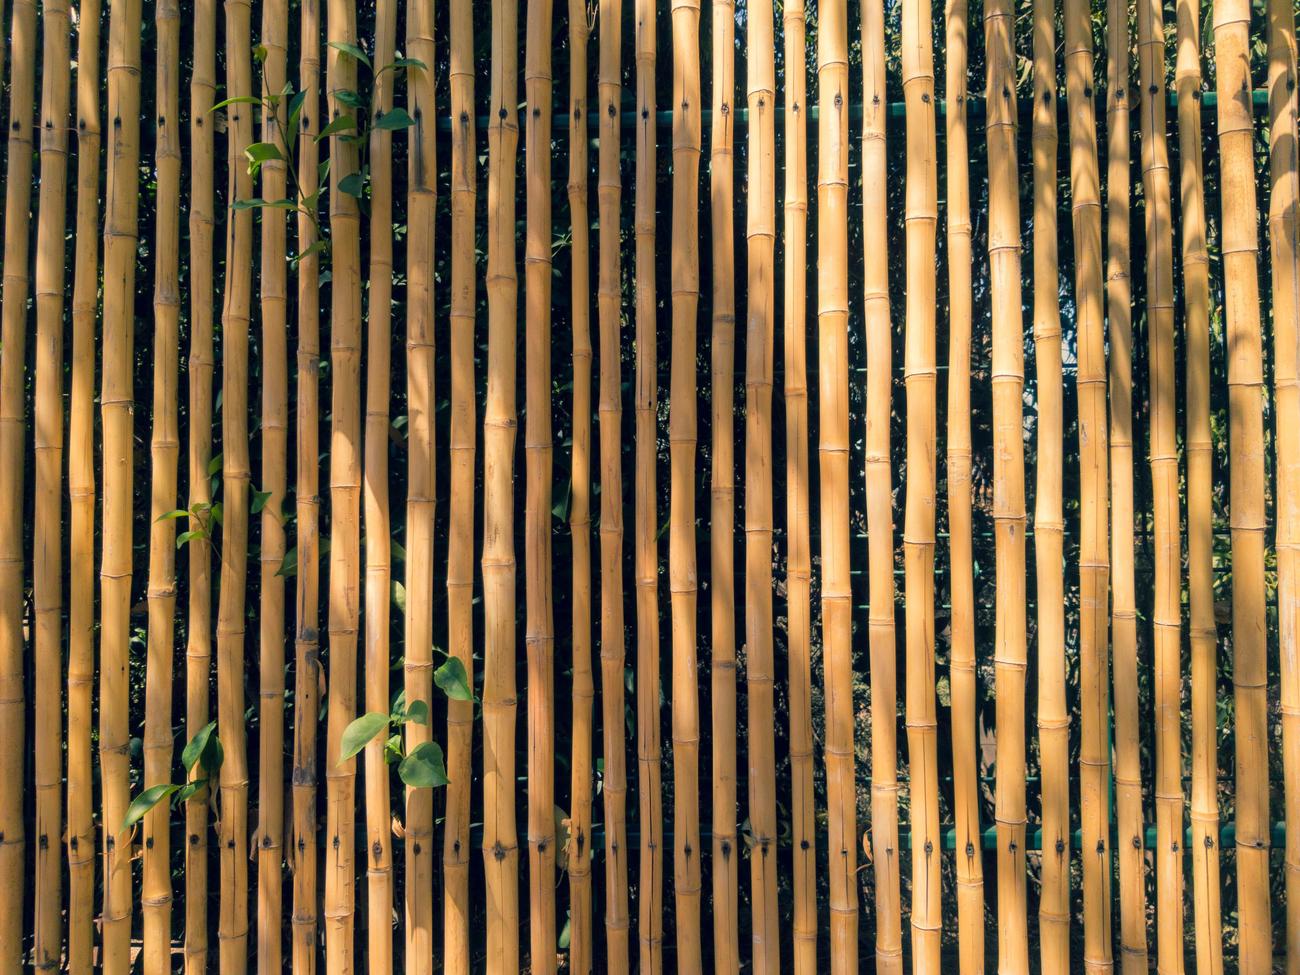 Eco friendly features of bamboo featured